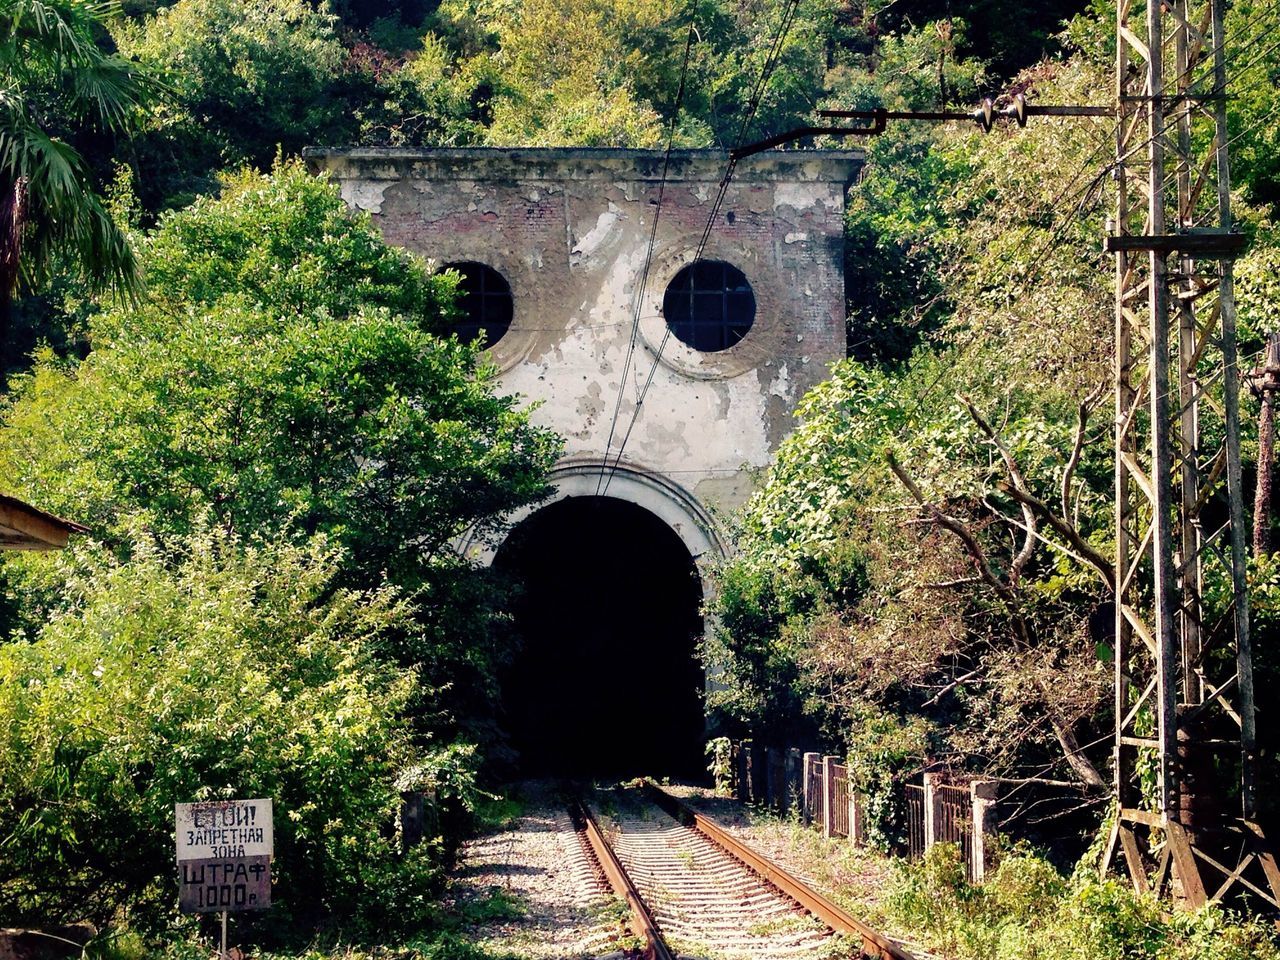 VIEW OF TUNNEL